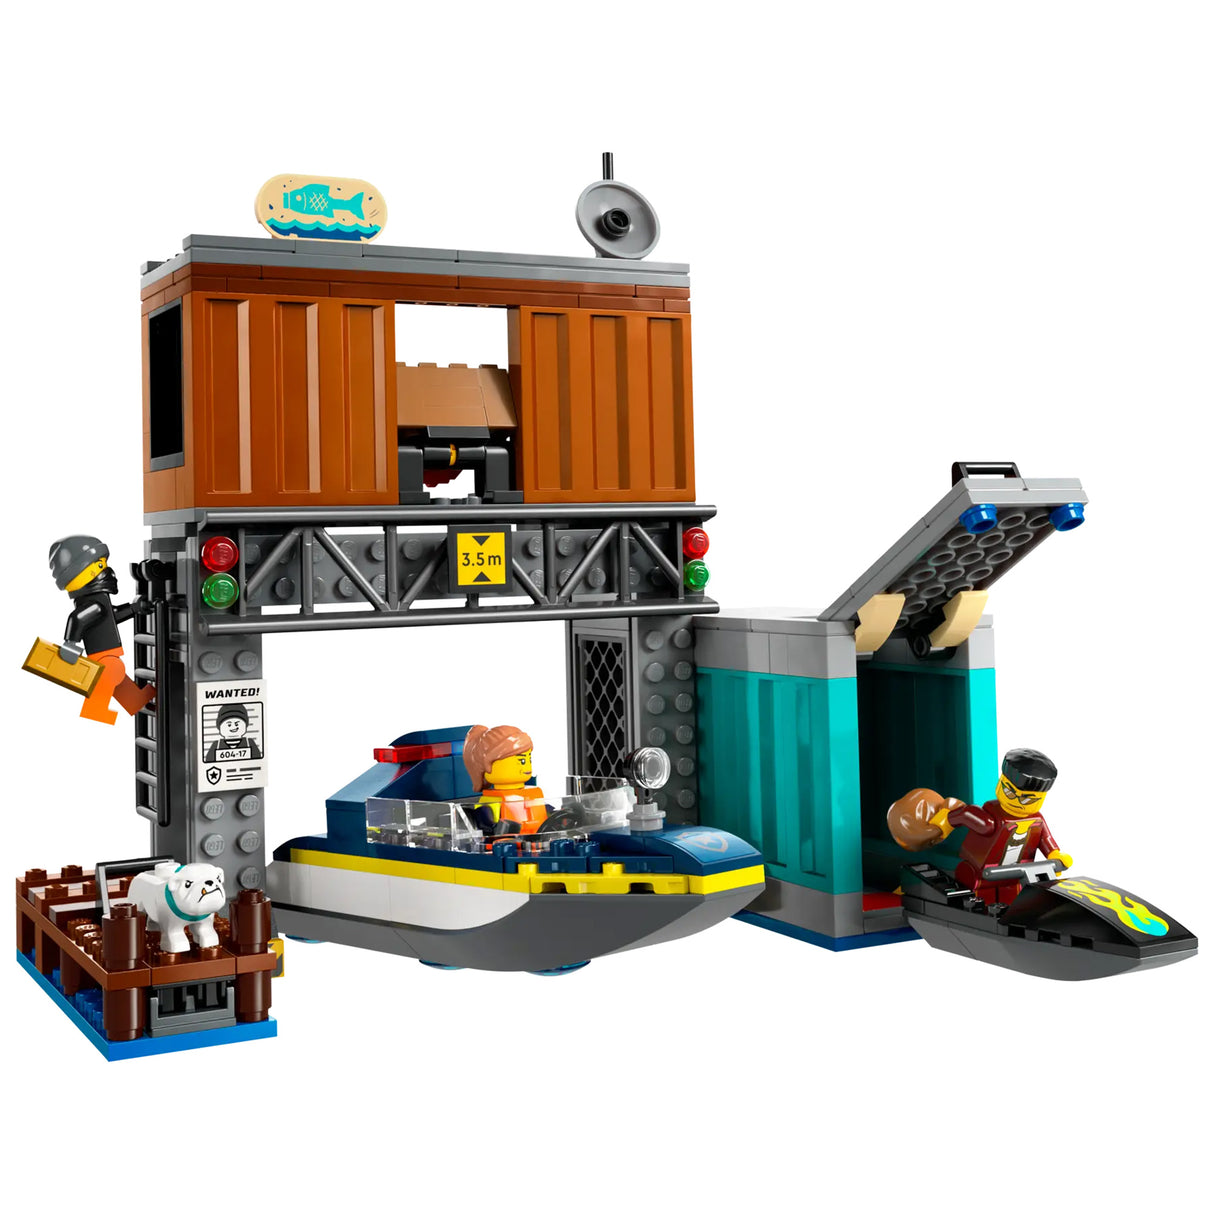 LEGO City Police Speedboat and Crooks' Hideout 60417, (311-pieces)